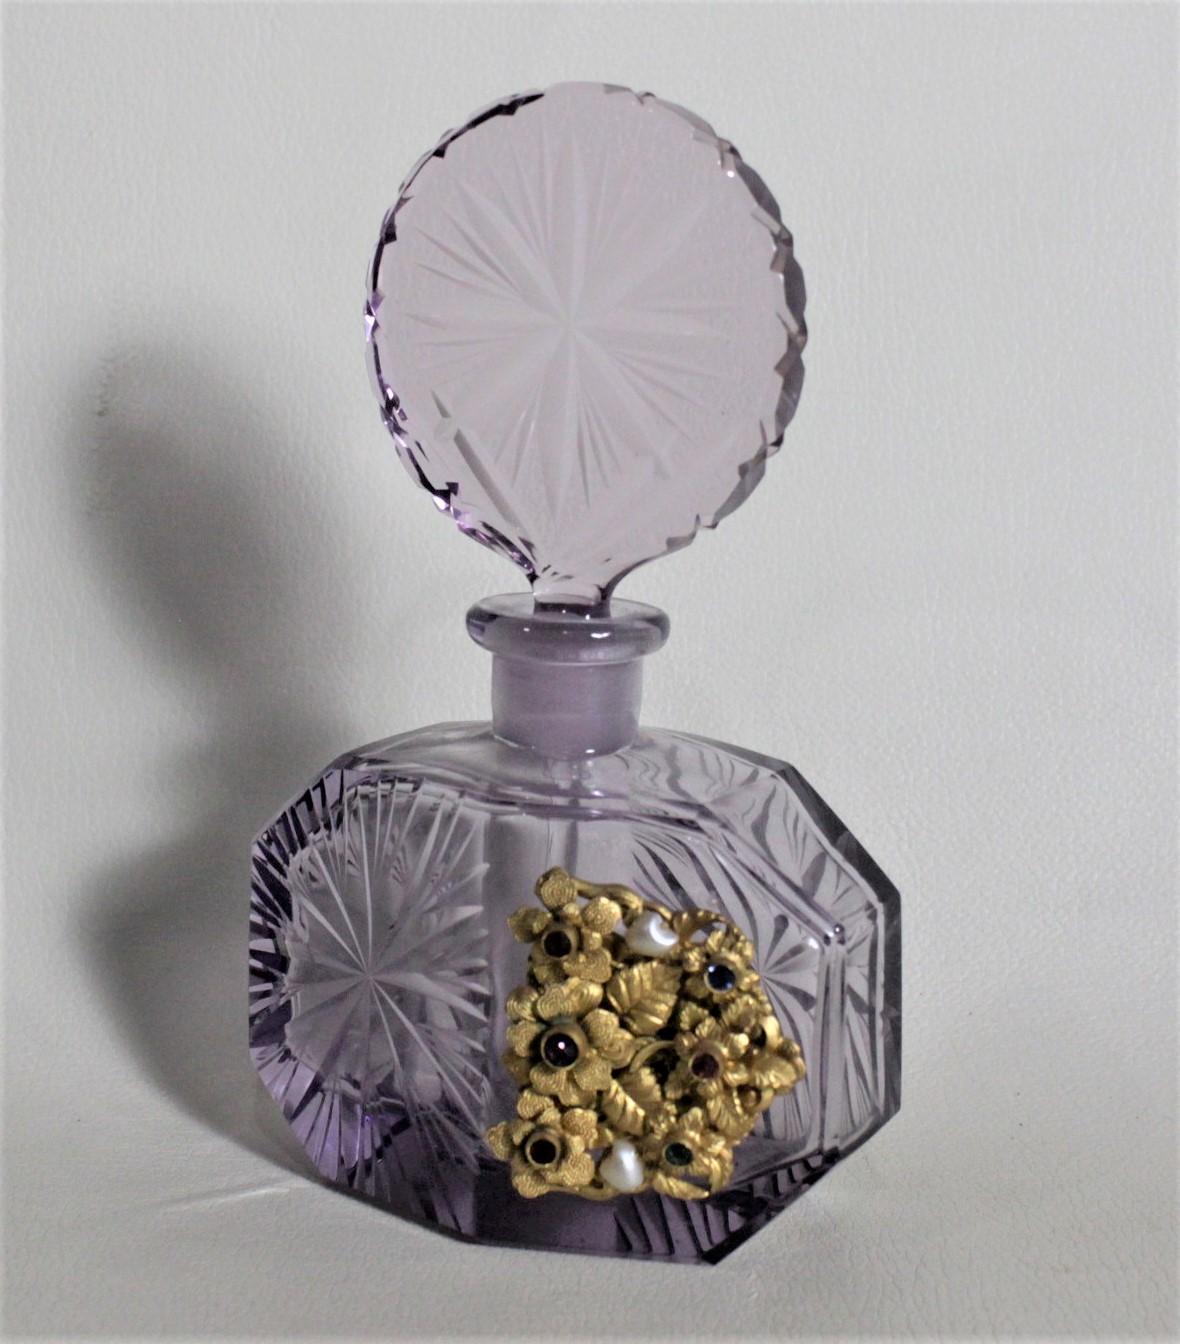 This Art Deco perfume or scent bottle is unsigned, so the artist cannot be identified, but was made in Bohemia in circa 1935. The glass is a deep purple with deep faceted sides and etched and cut top. The bottle features an ornate gold toned